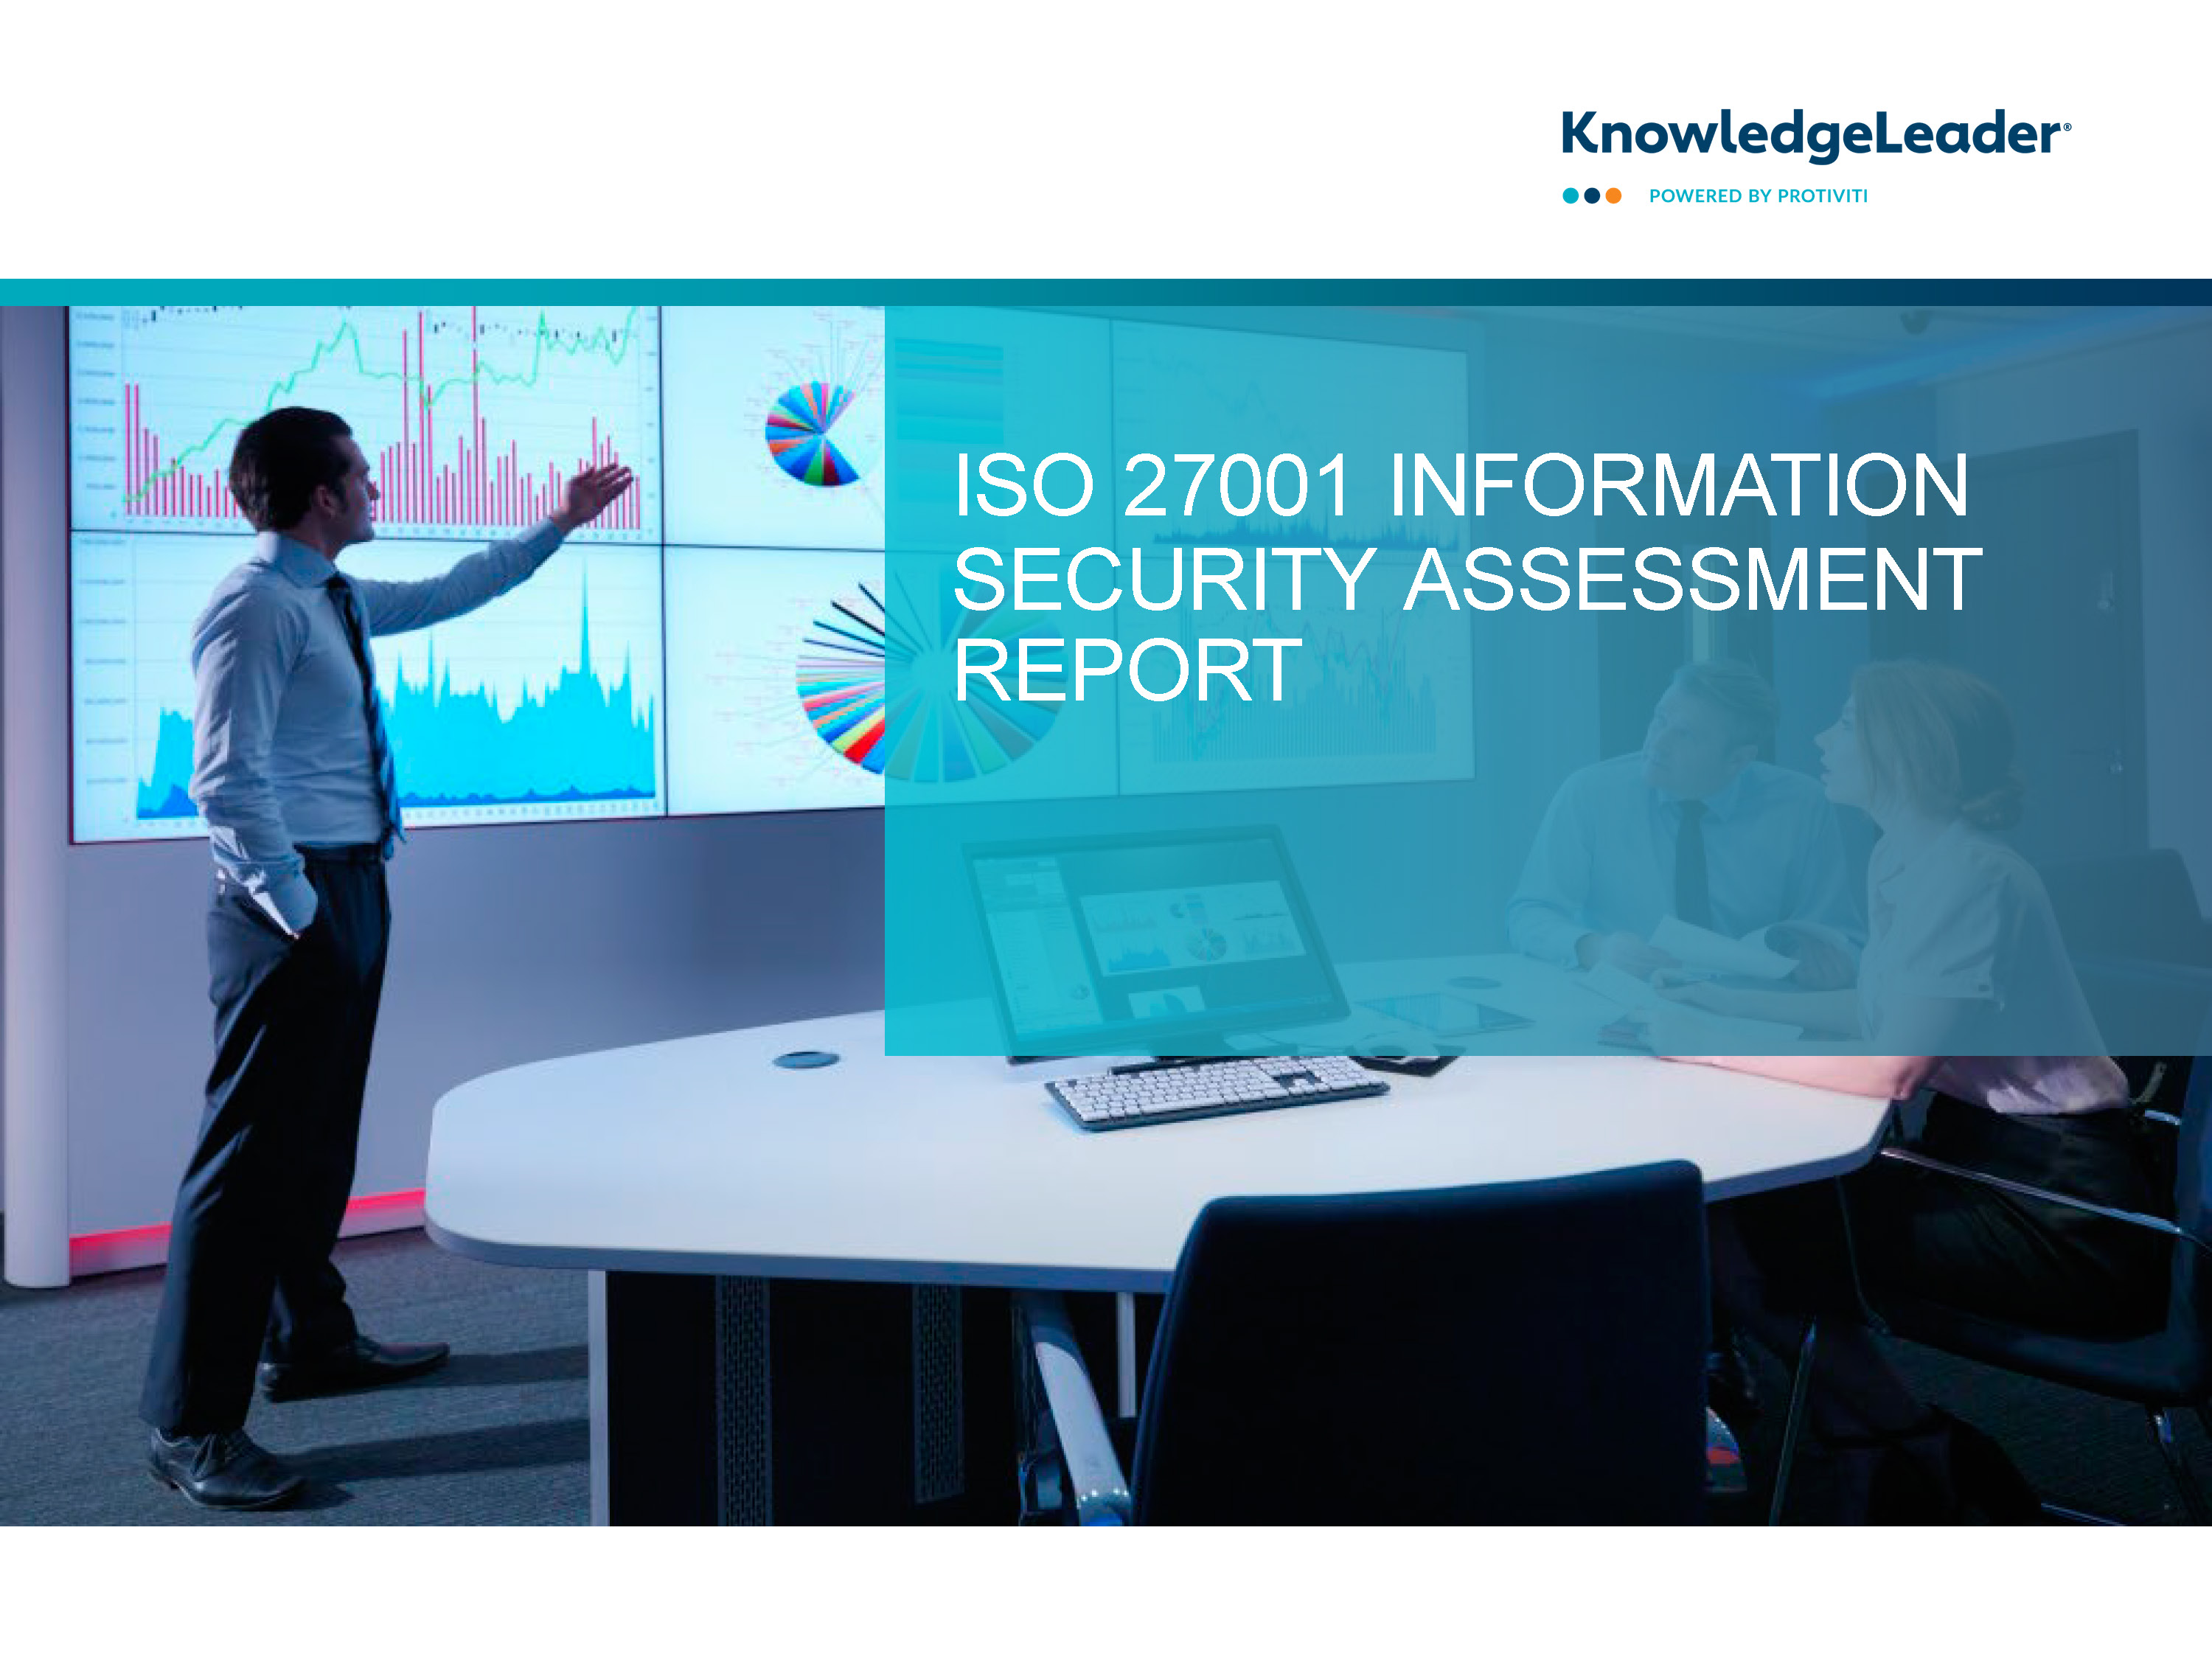 Screenshot of the first page of ISO 27001 Information Security Assessment Report